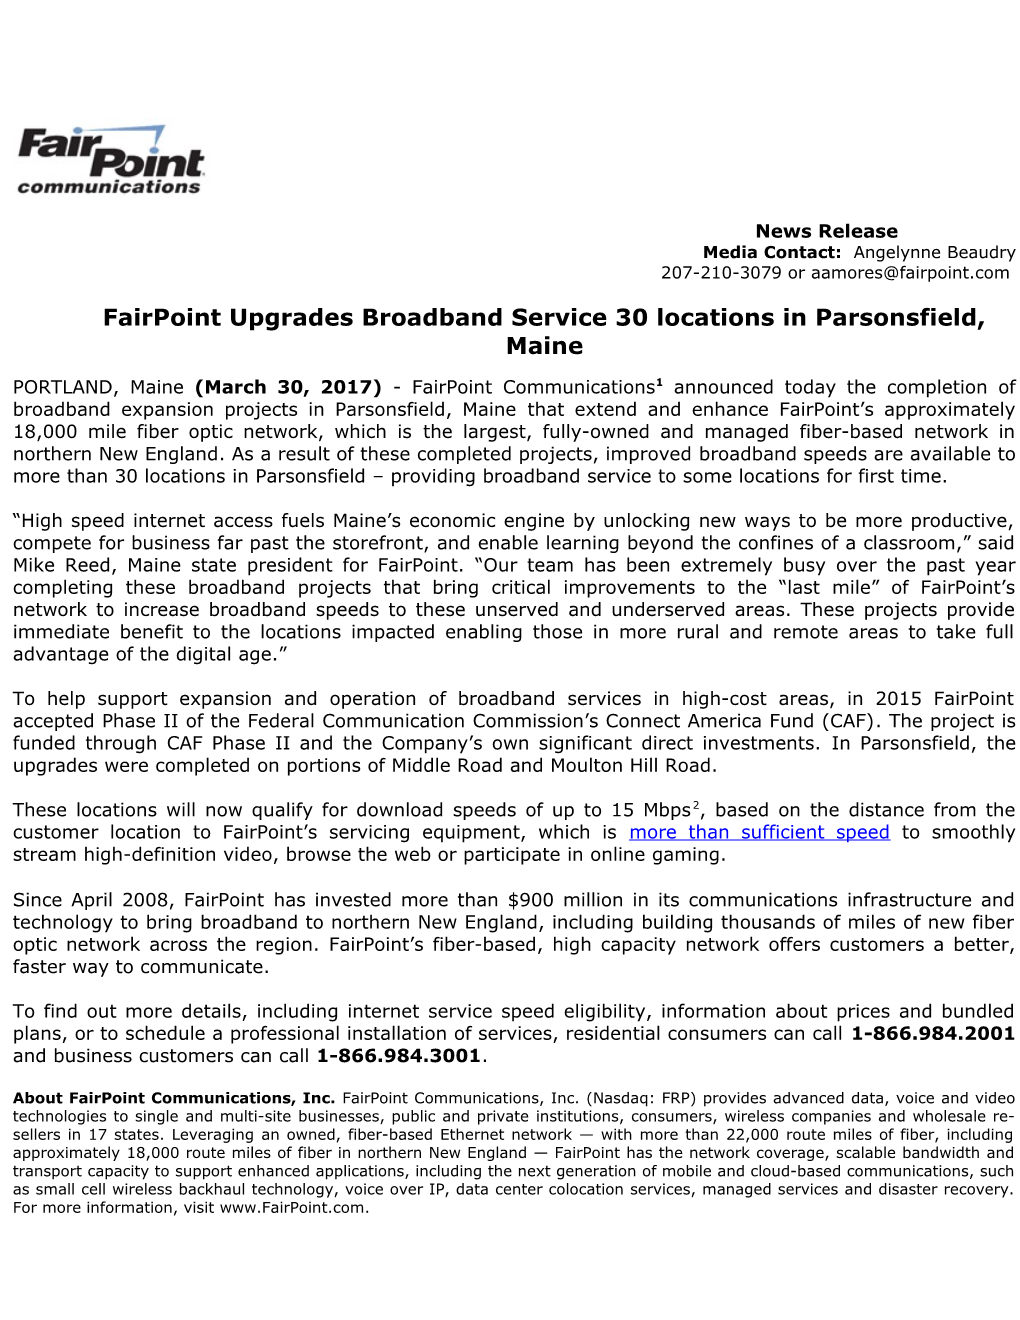 Fairpoint Upgrades Broadband Service 30 Locations in Parsonsfield, Maine